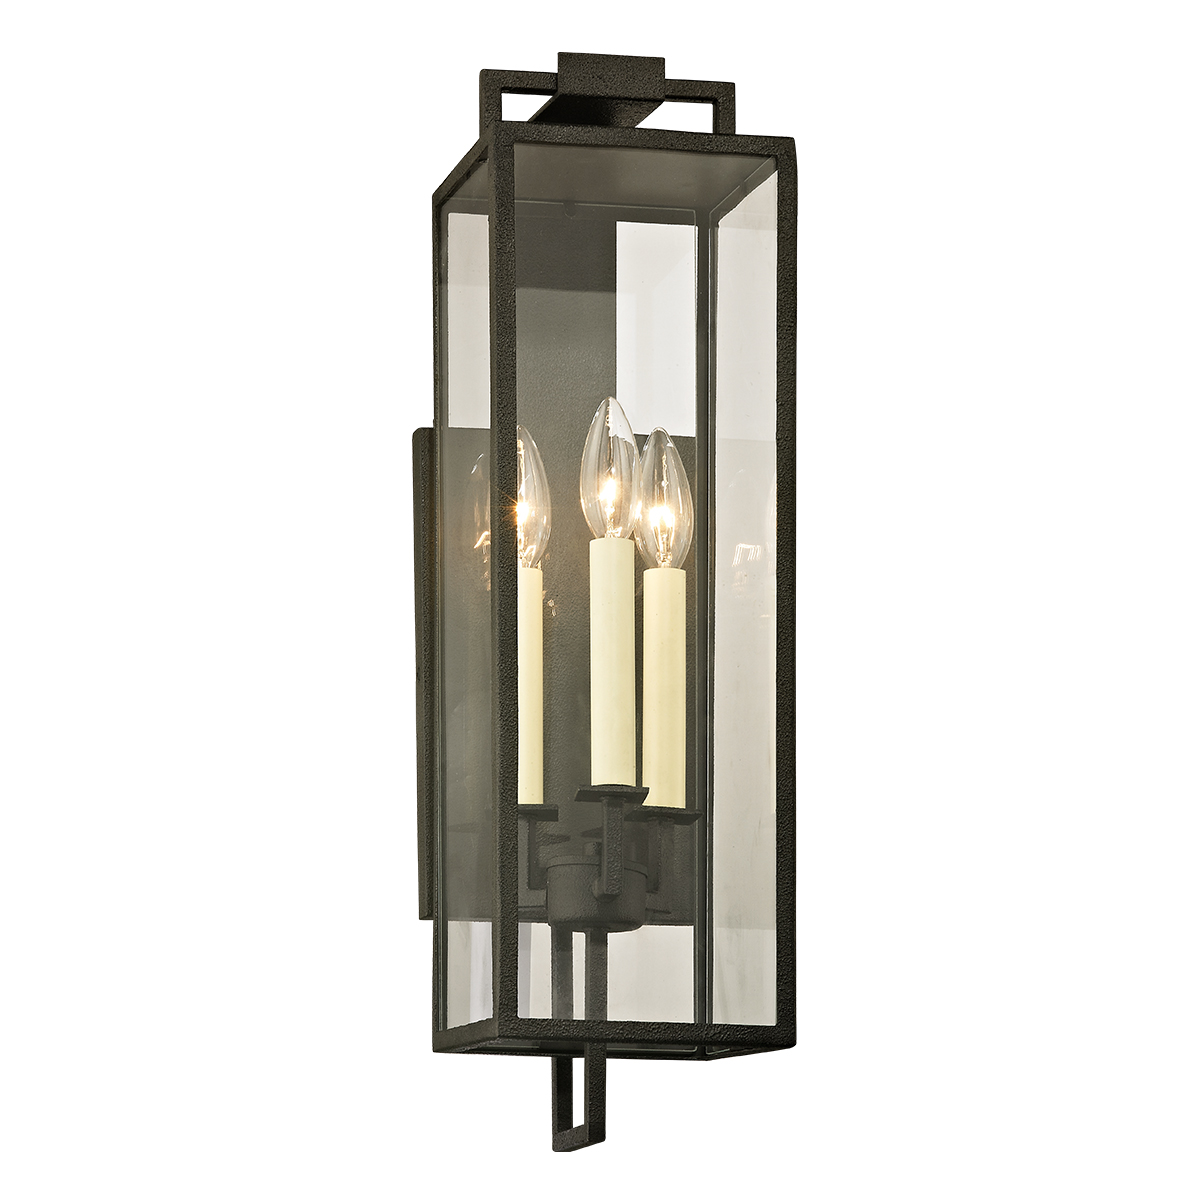 Beckham outdoor sconce - Forged Iron large